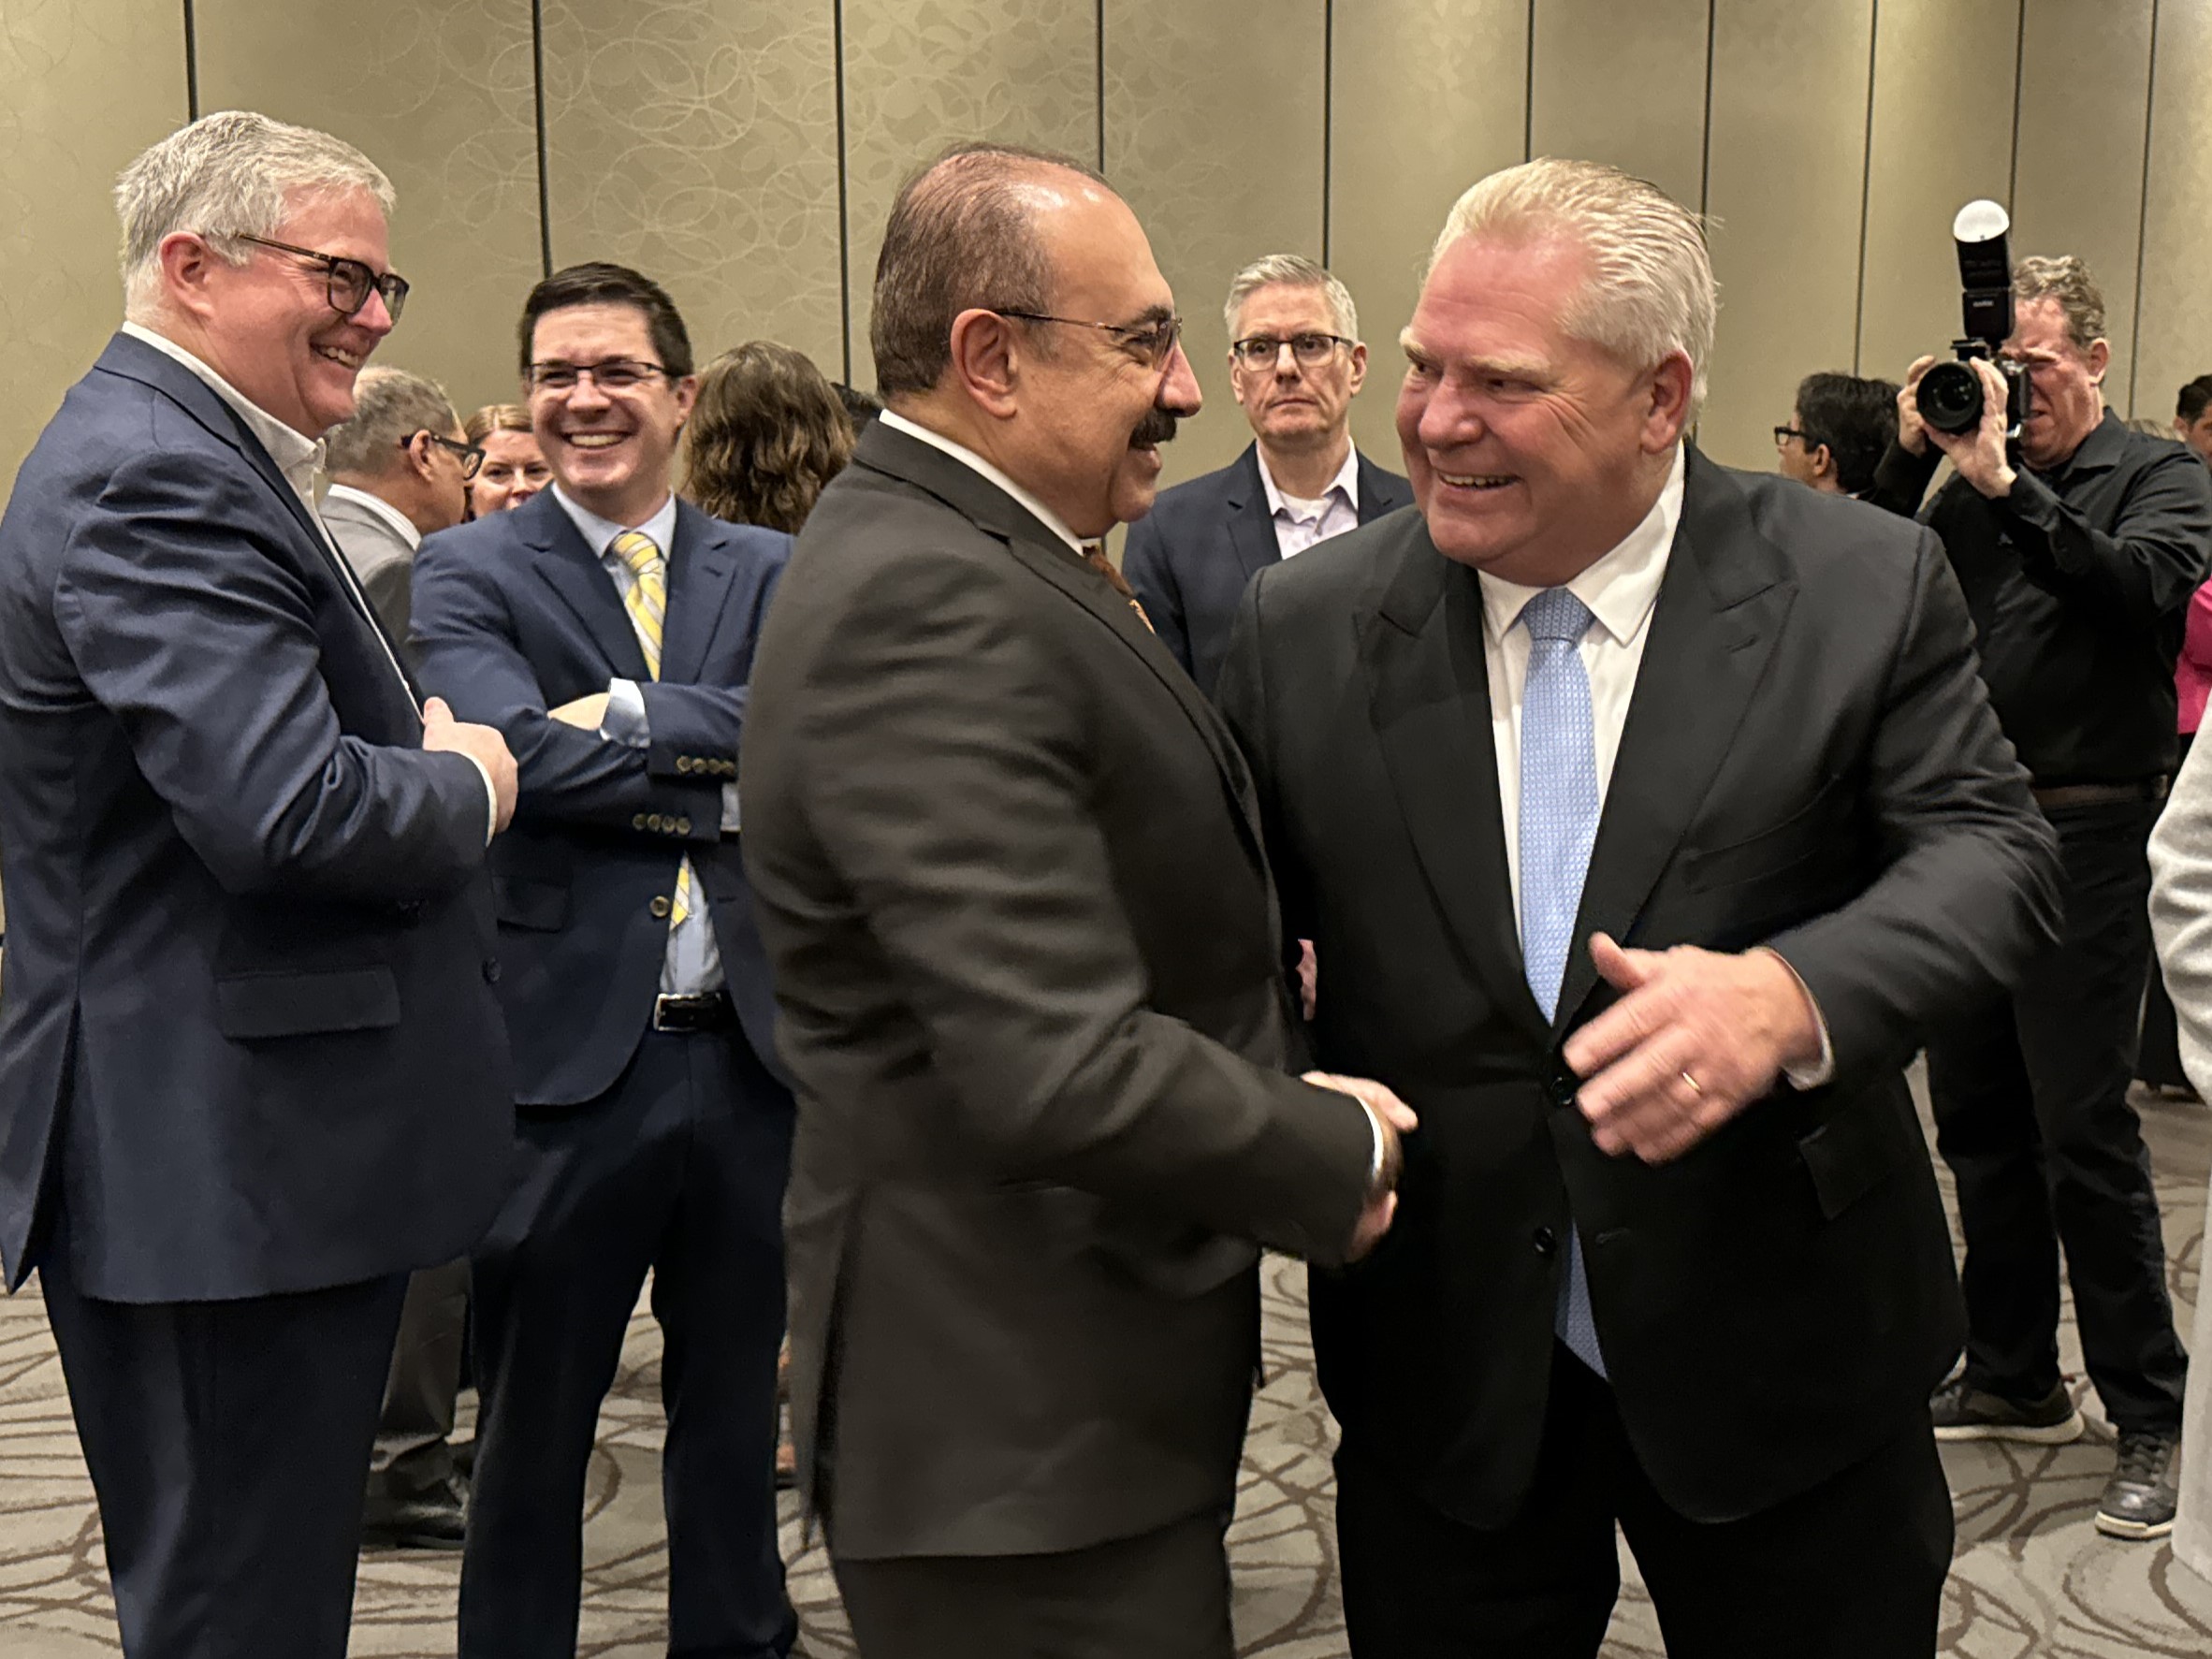 MPP Sabawy and Premier Ford shake hands before a major announcement at the Mississauga Board of Trade on February 8, 2024.